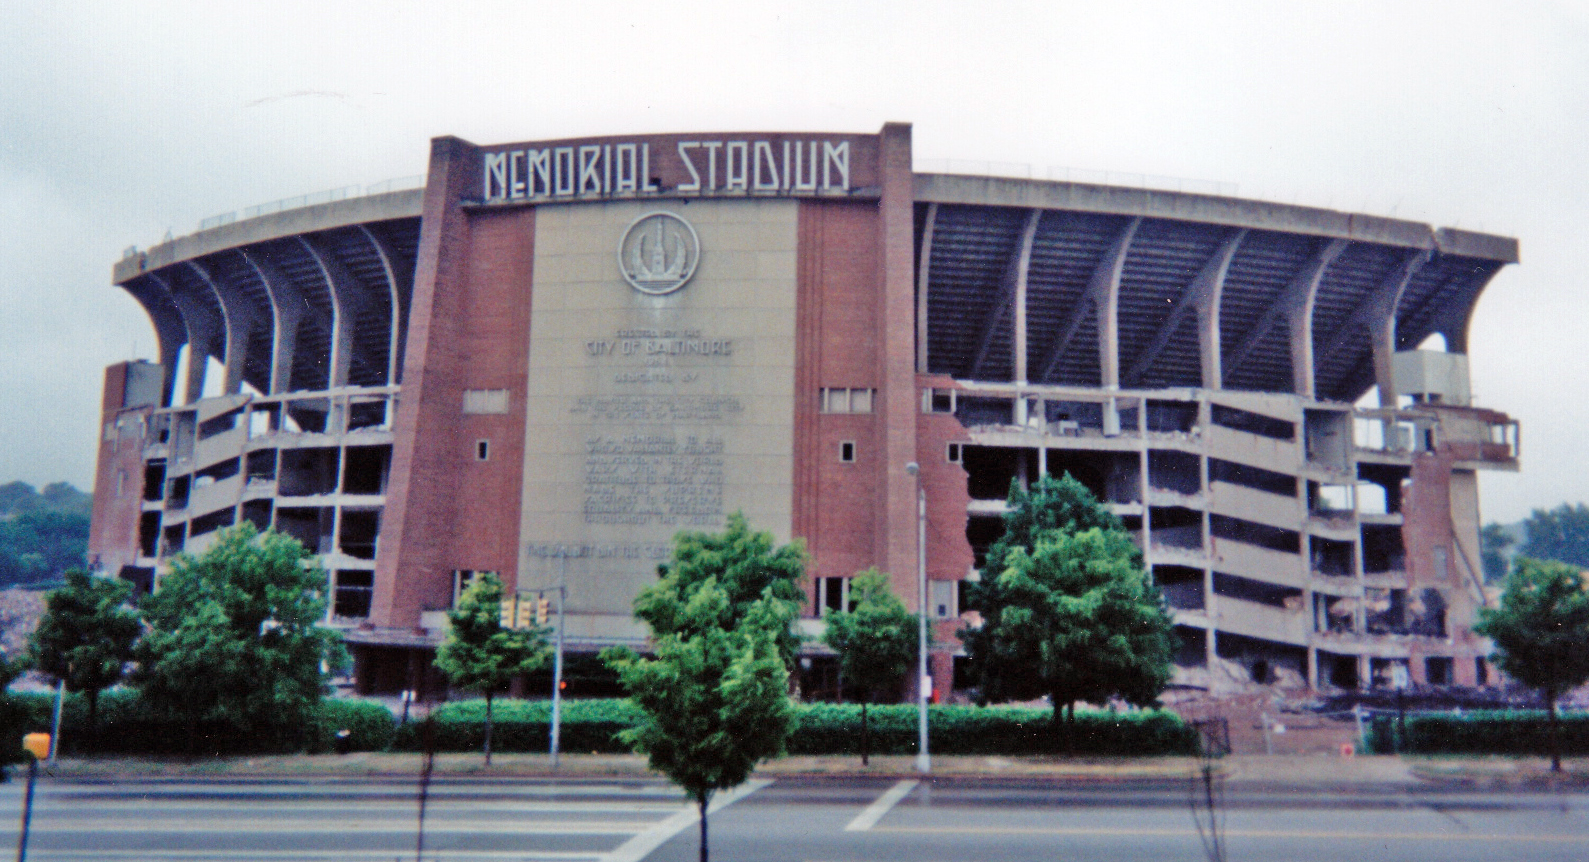 Memorial Stadium in Baltimore, home of the Orioles from 1954 to 1991 (DAVID STINSON)